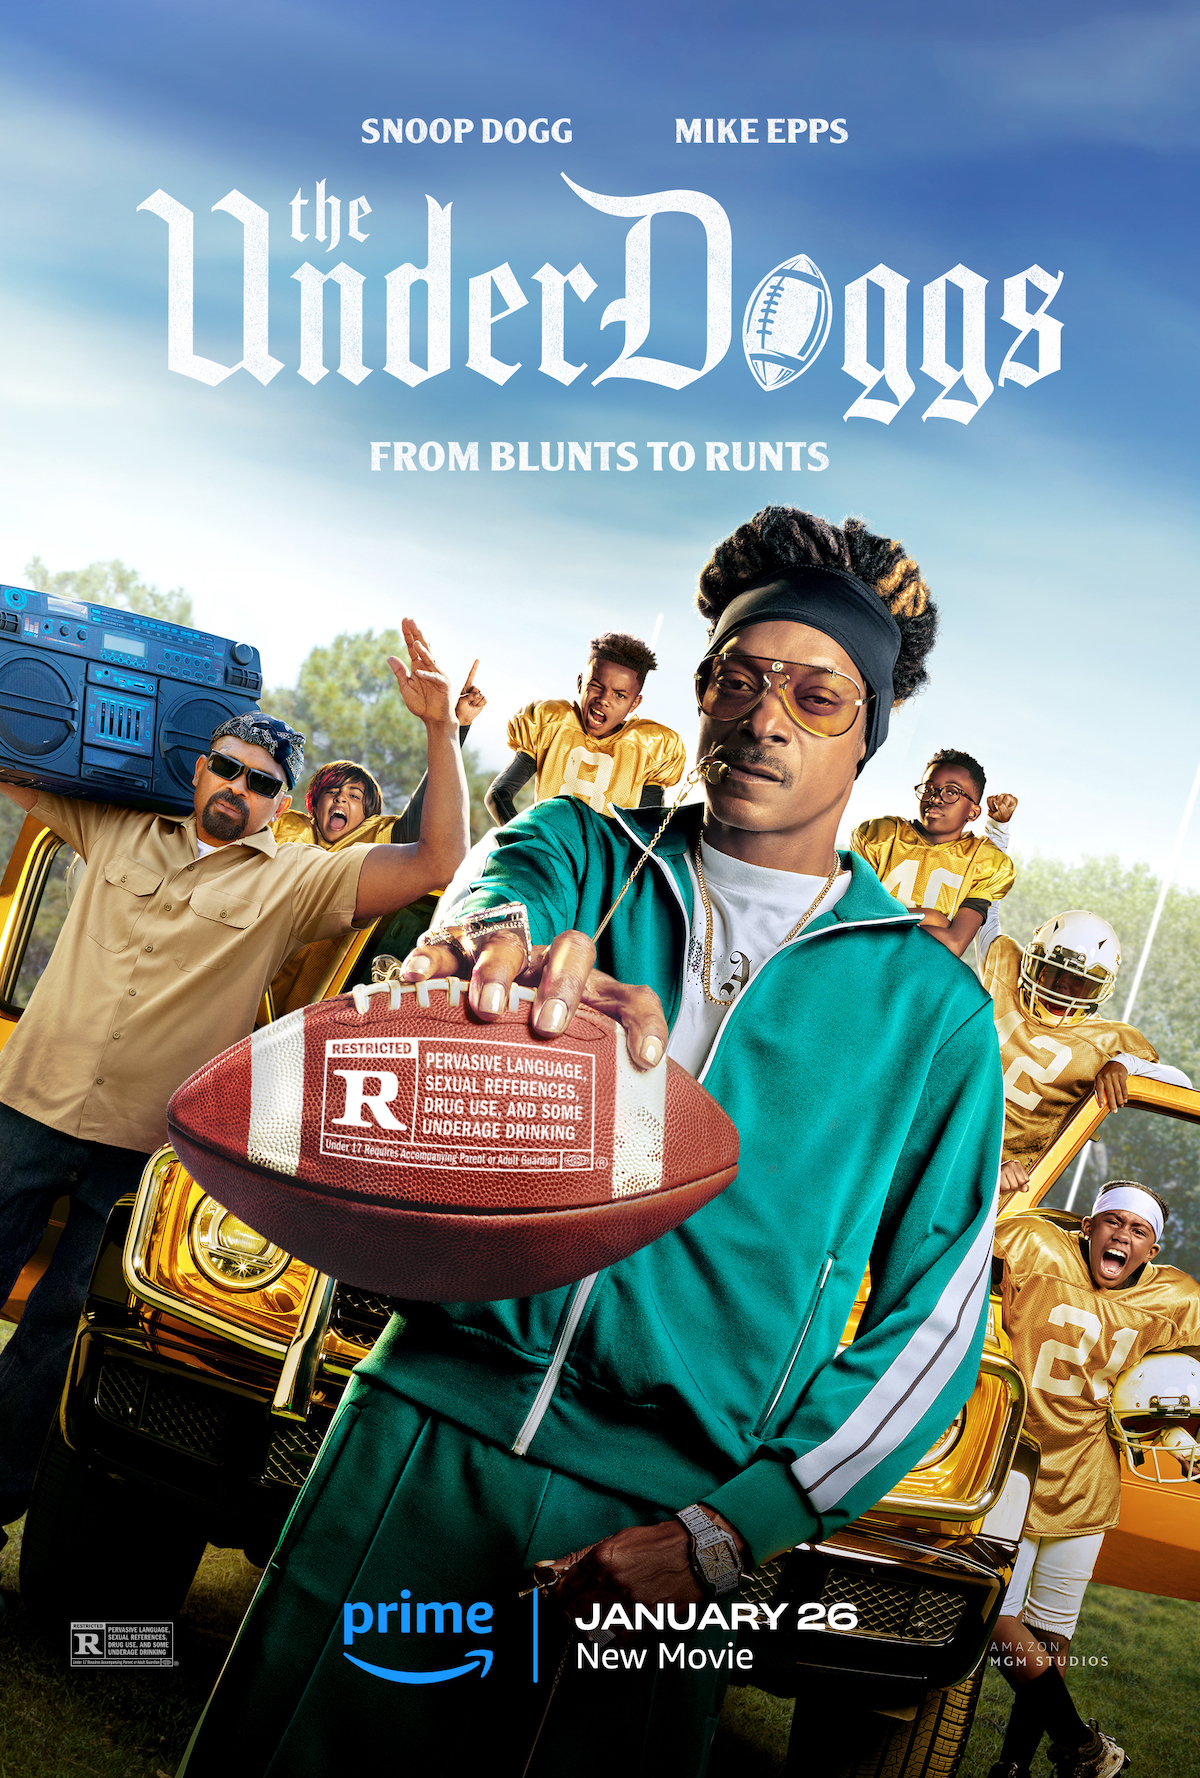 Our ‘What to Watch’ Film List Includes ‘The Underdoggs’ Starring Snoop Dogg